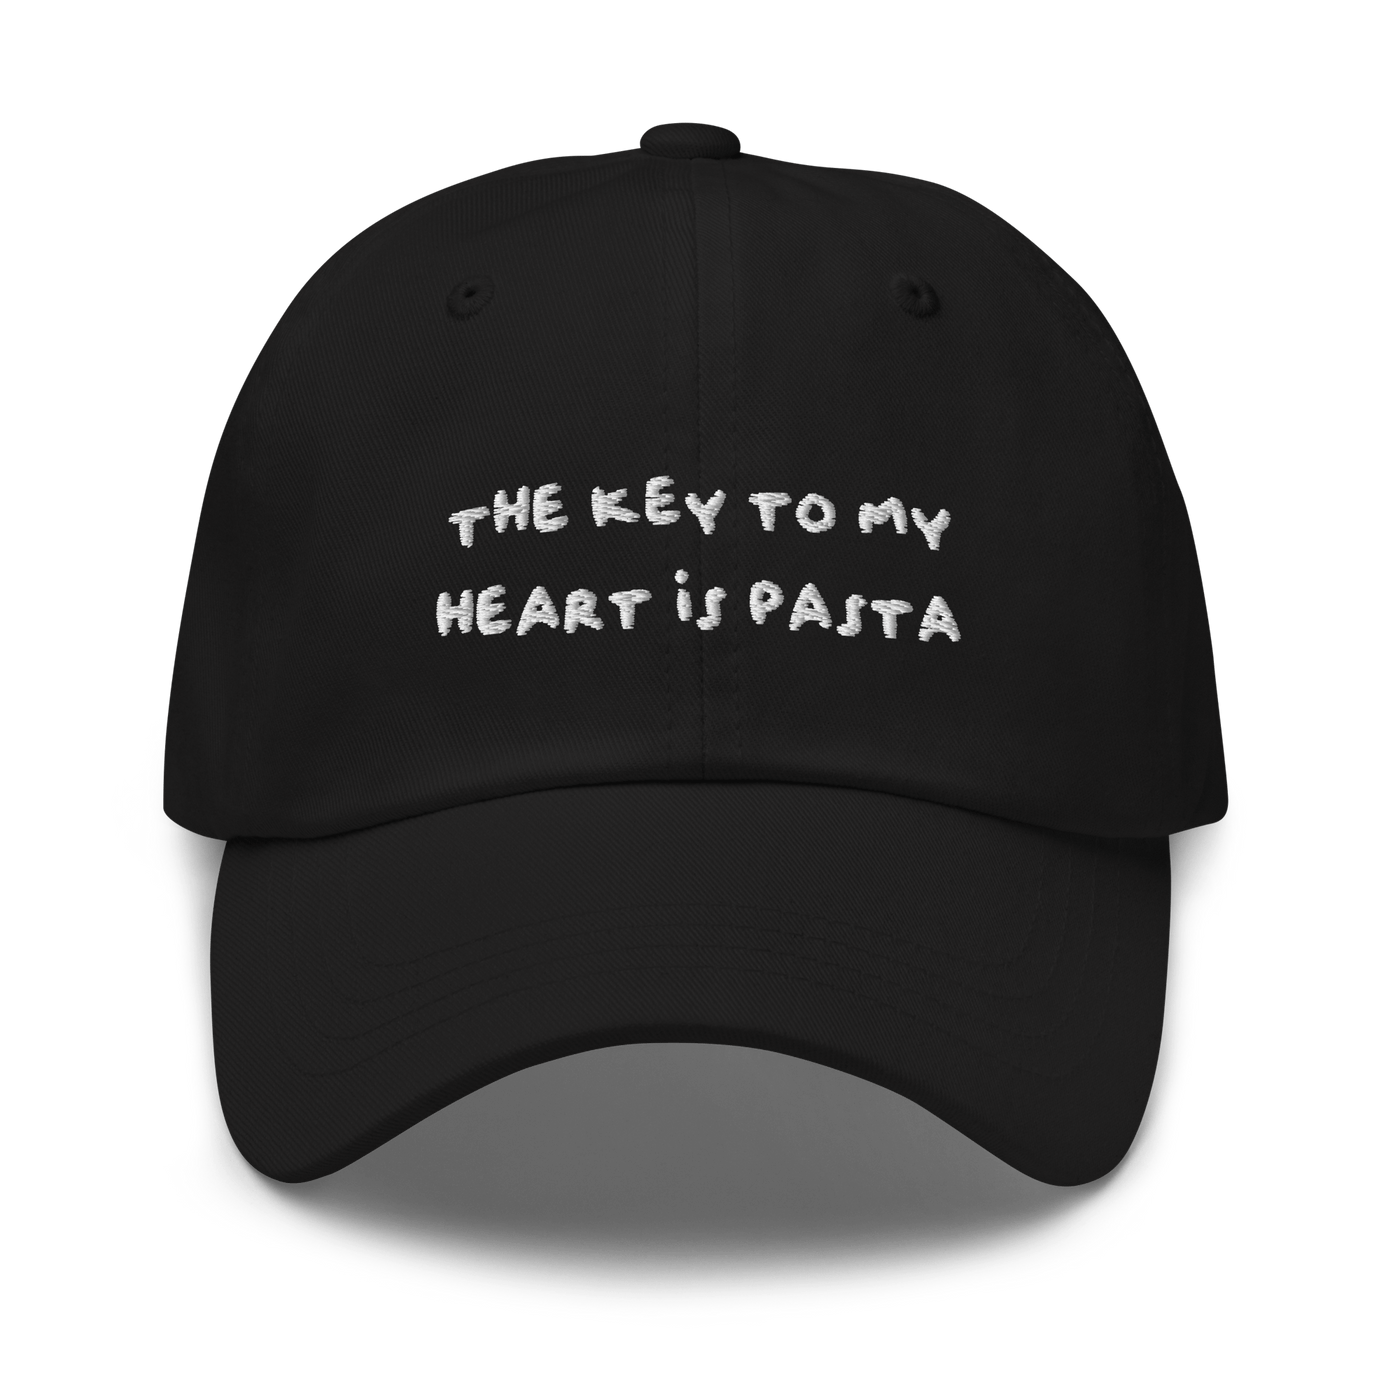 Dad hat - Black - - Just Another Cap Store